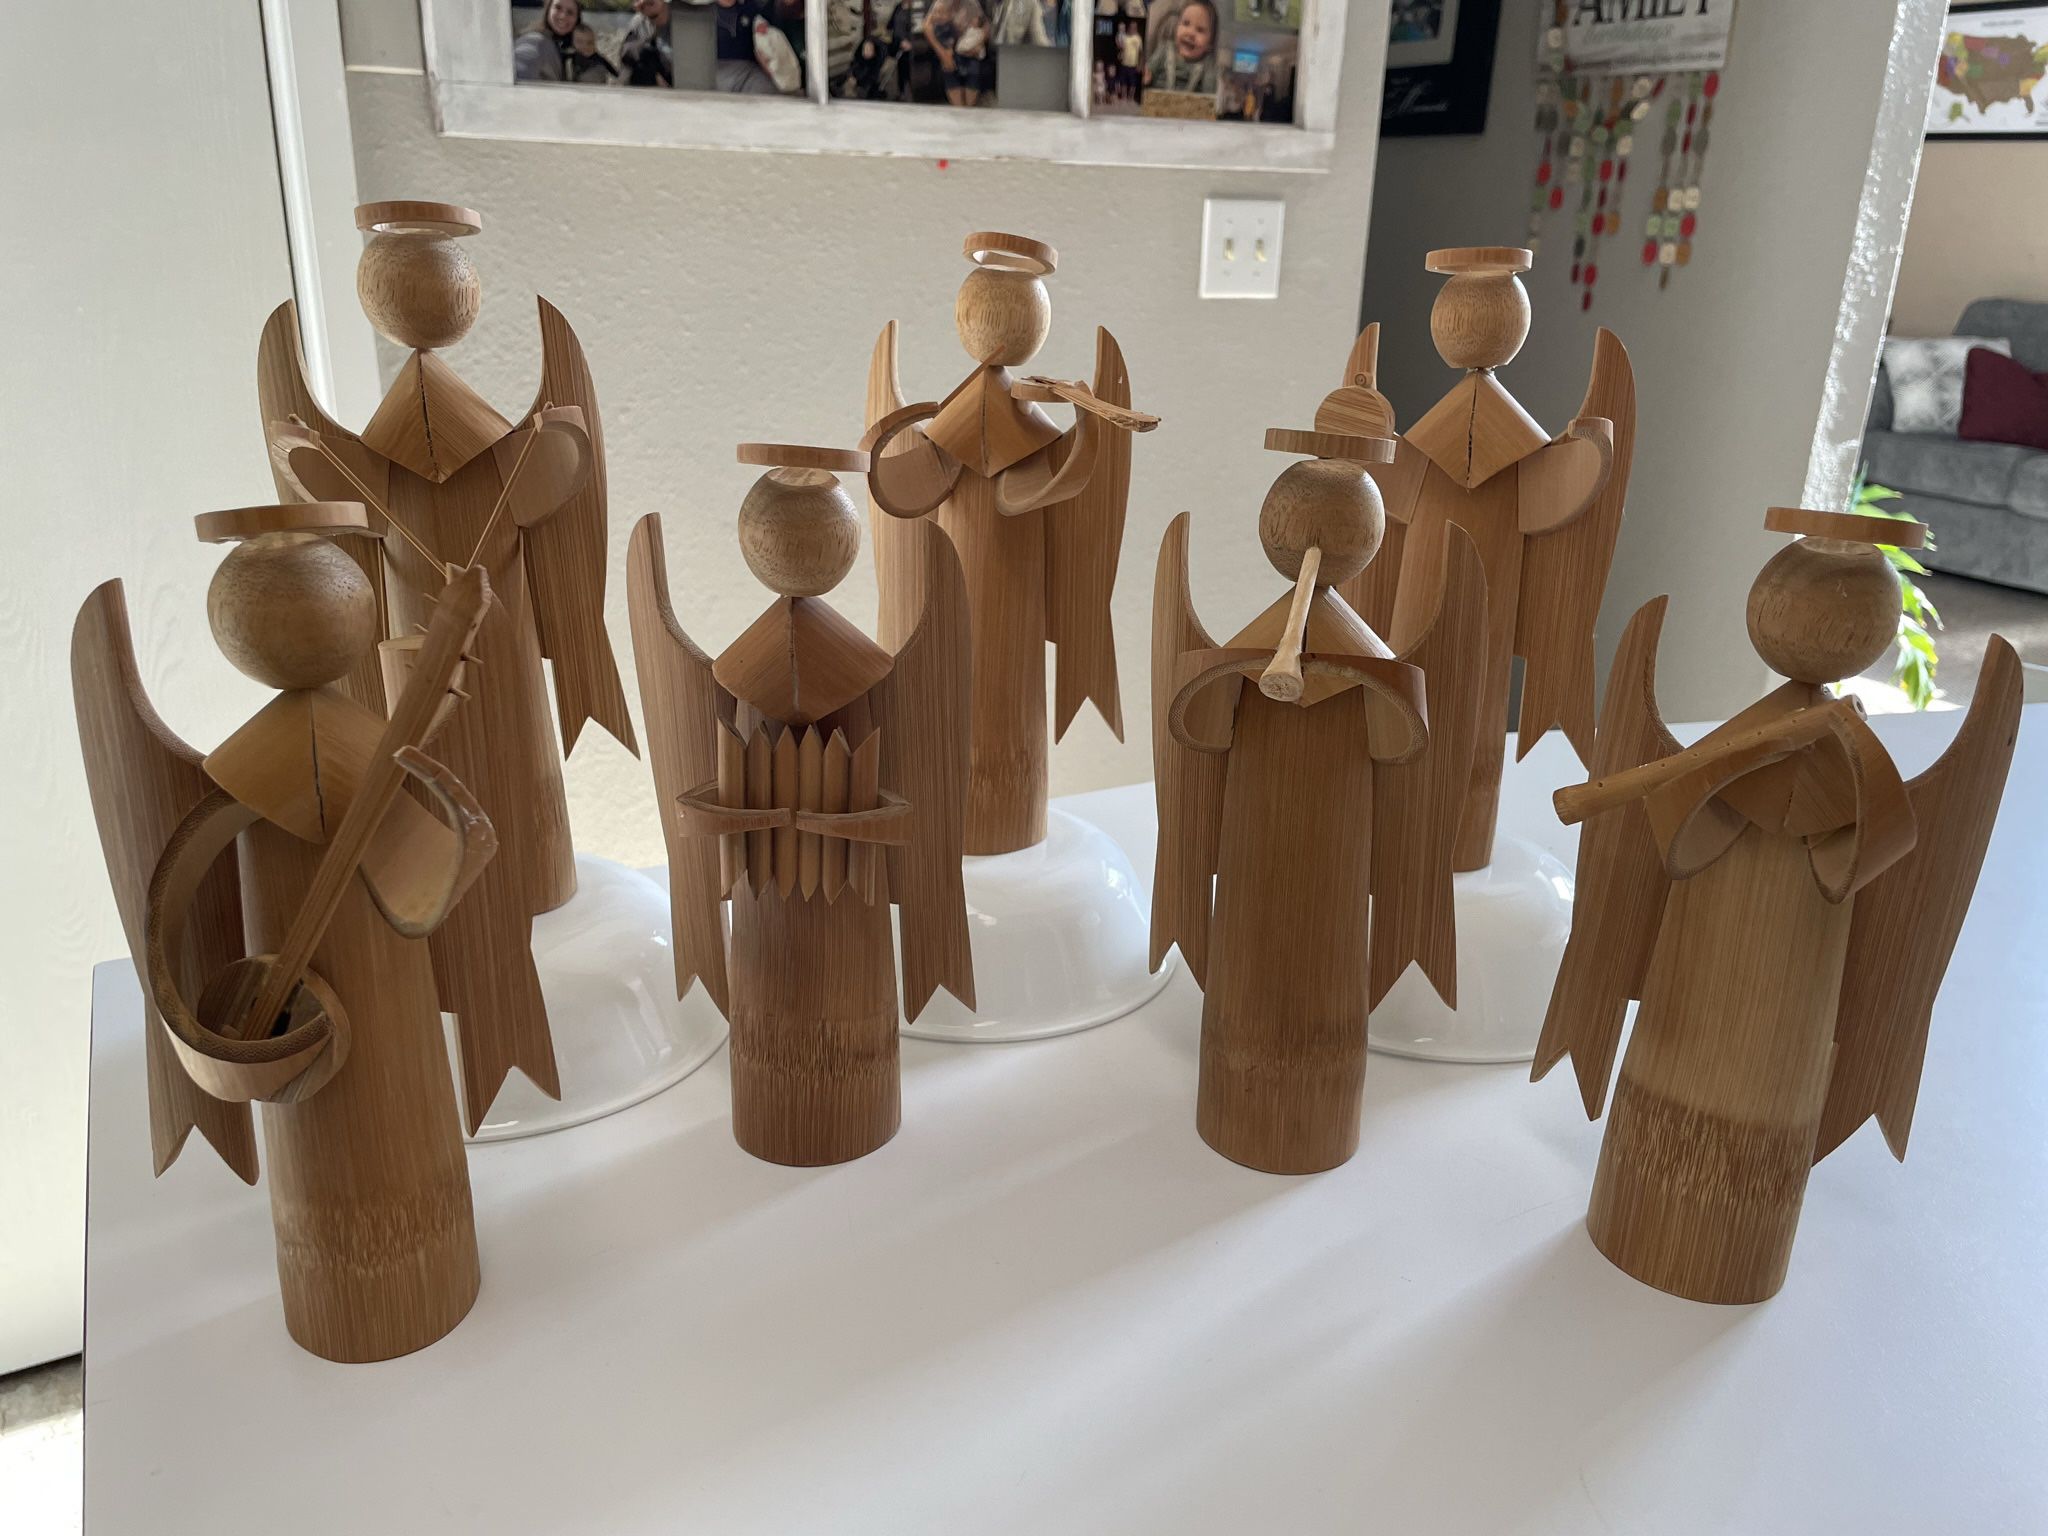 Wooden Angel Musical Band (7)